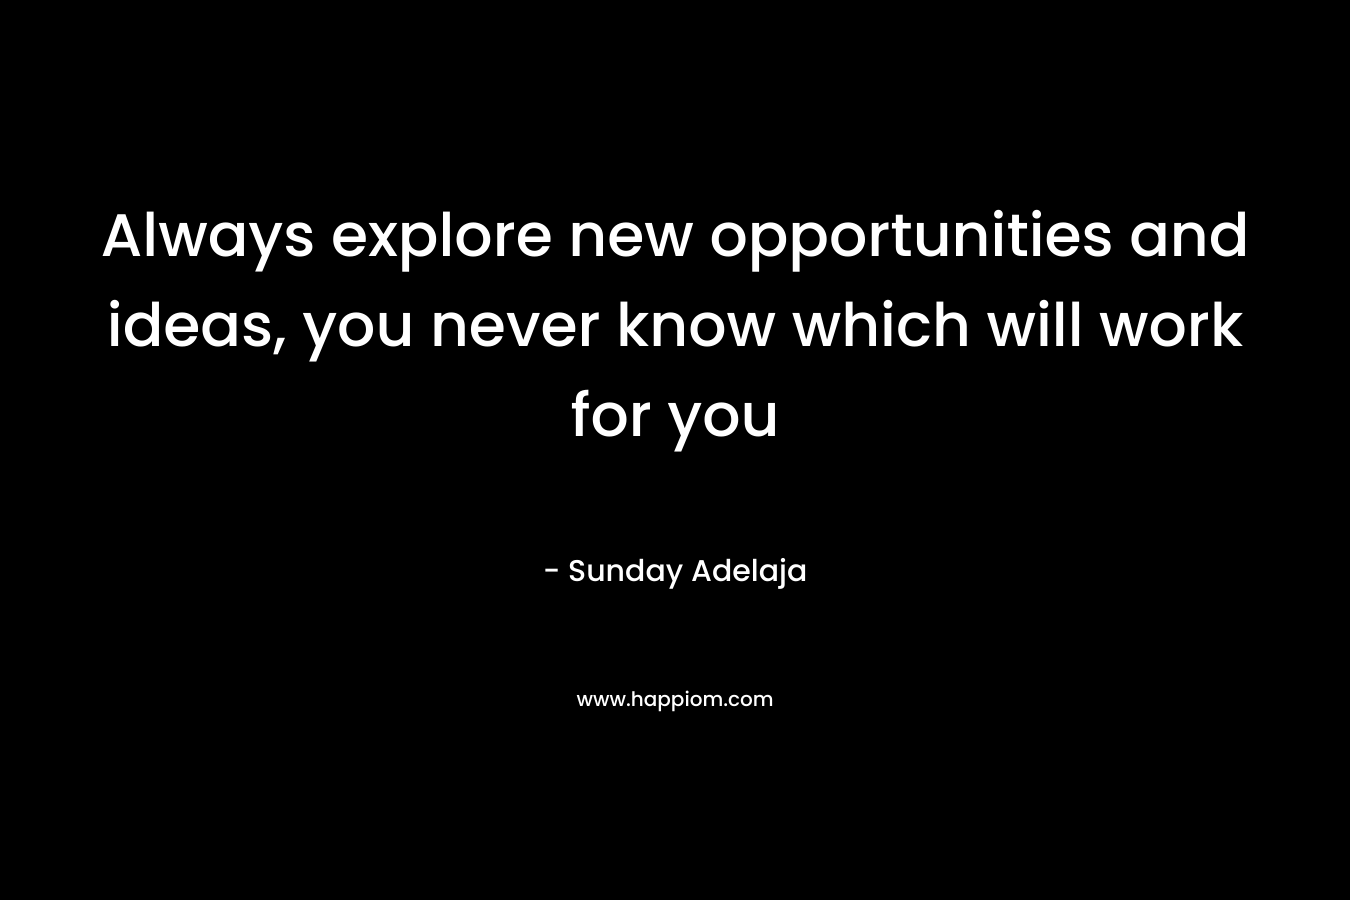 Always explore new opportunities and ideas, you never know which will work for you